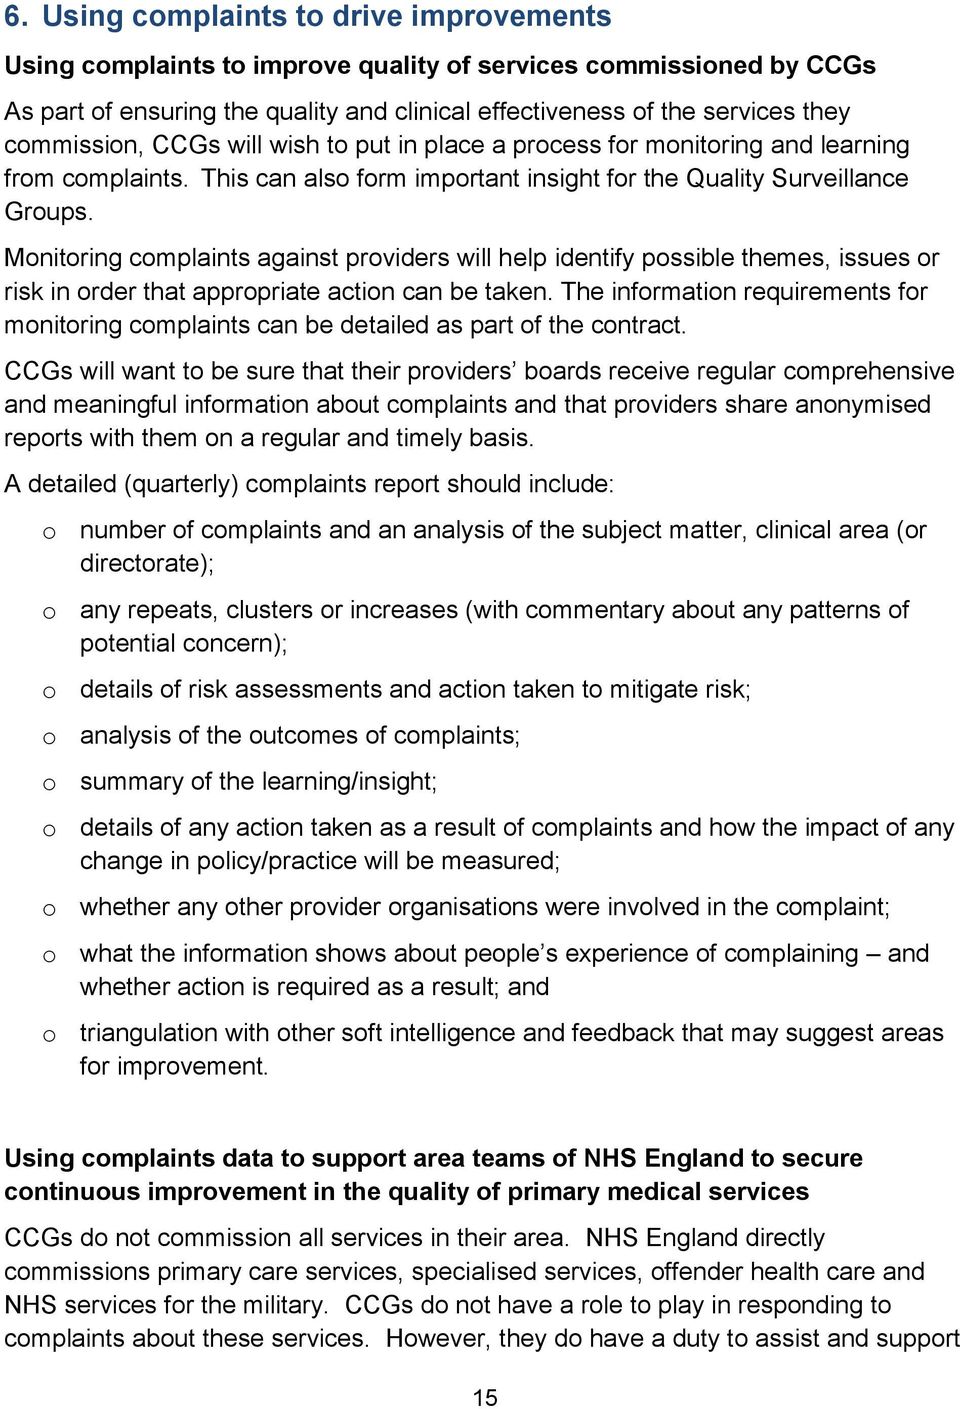 Monitoring complaints against providers will help identify possible themes, issues or risk in order that appropriate action can be taken.